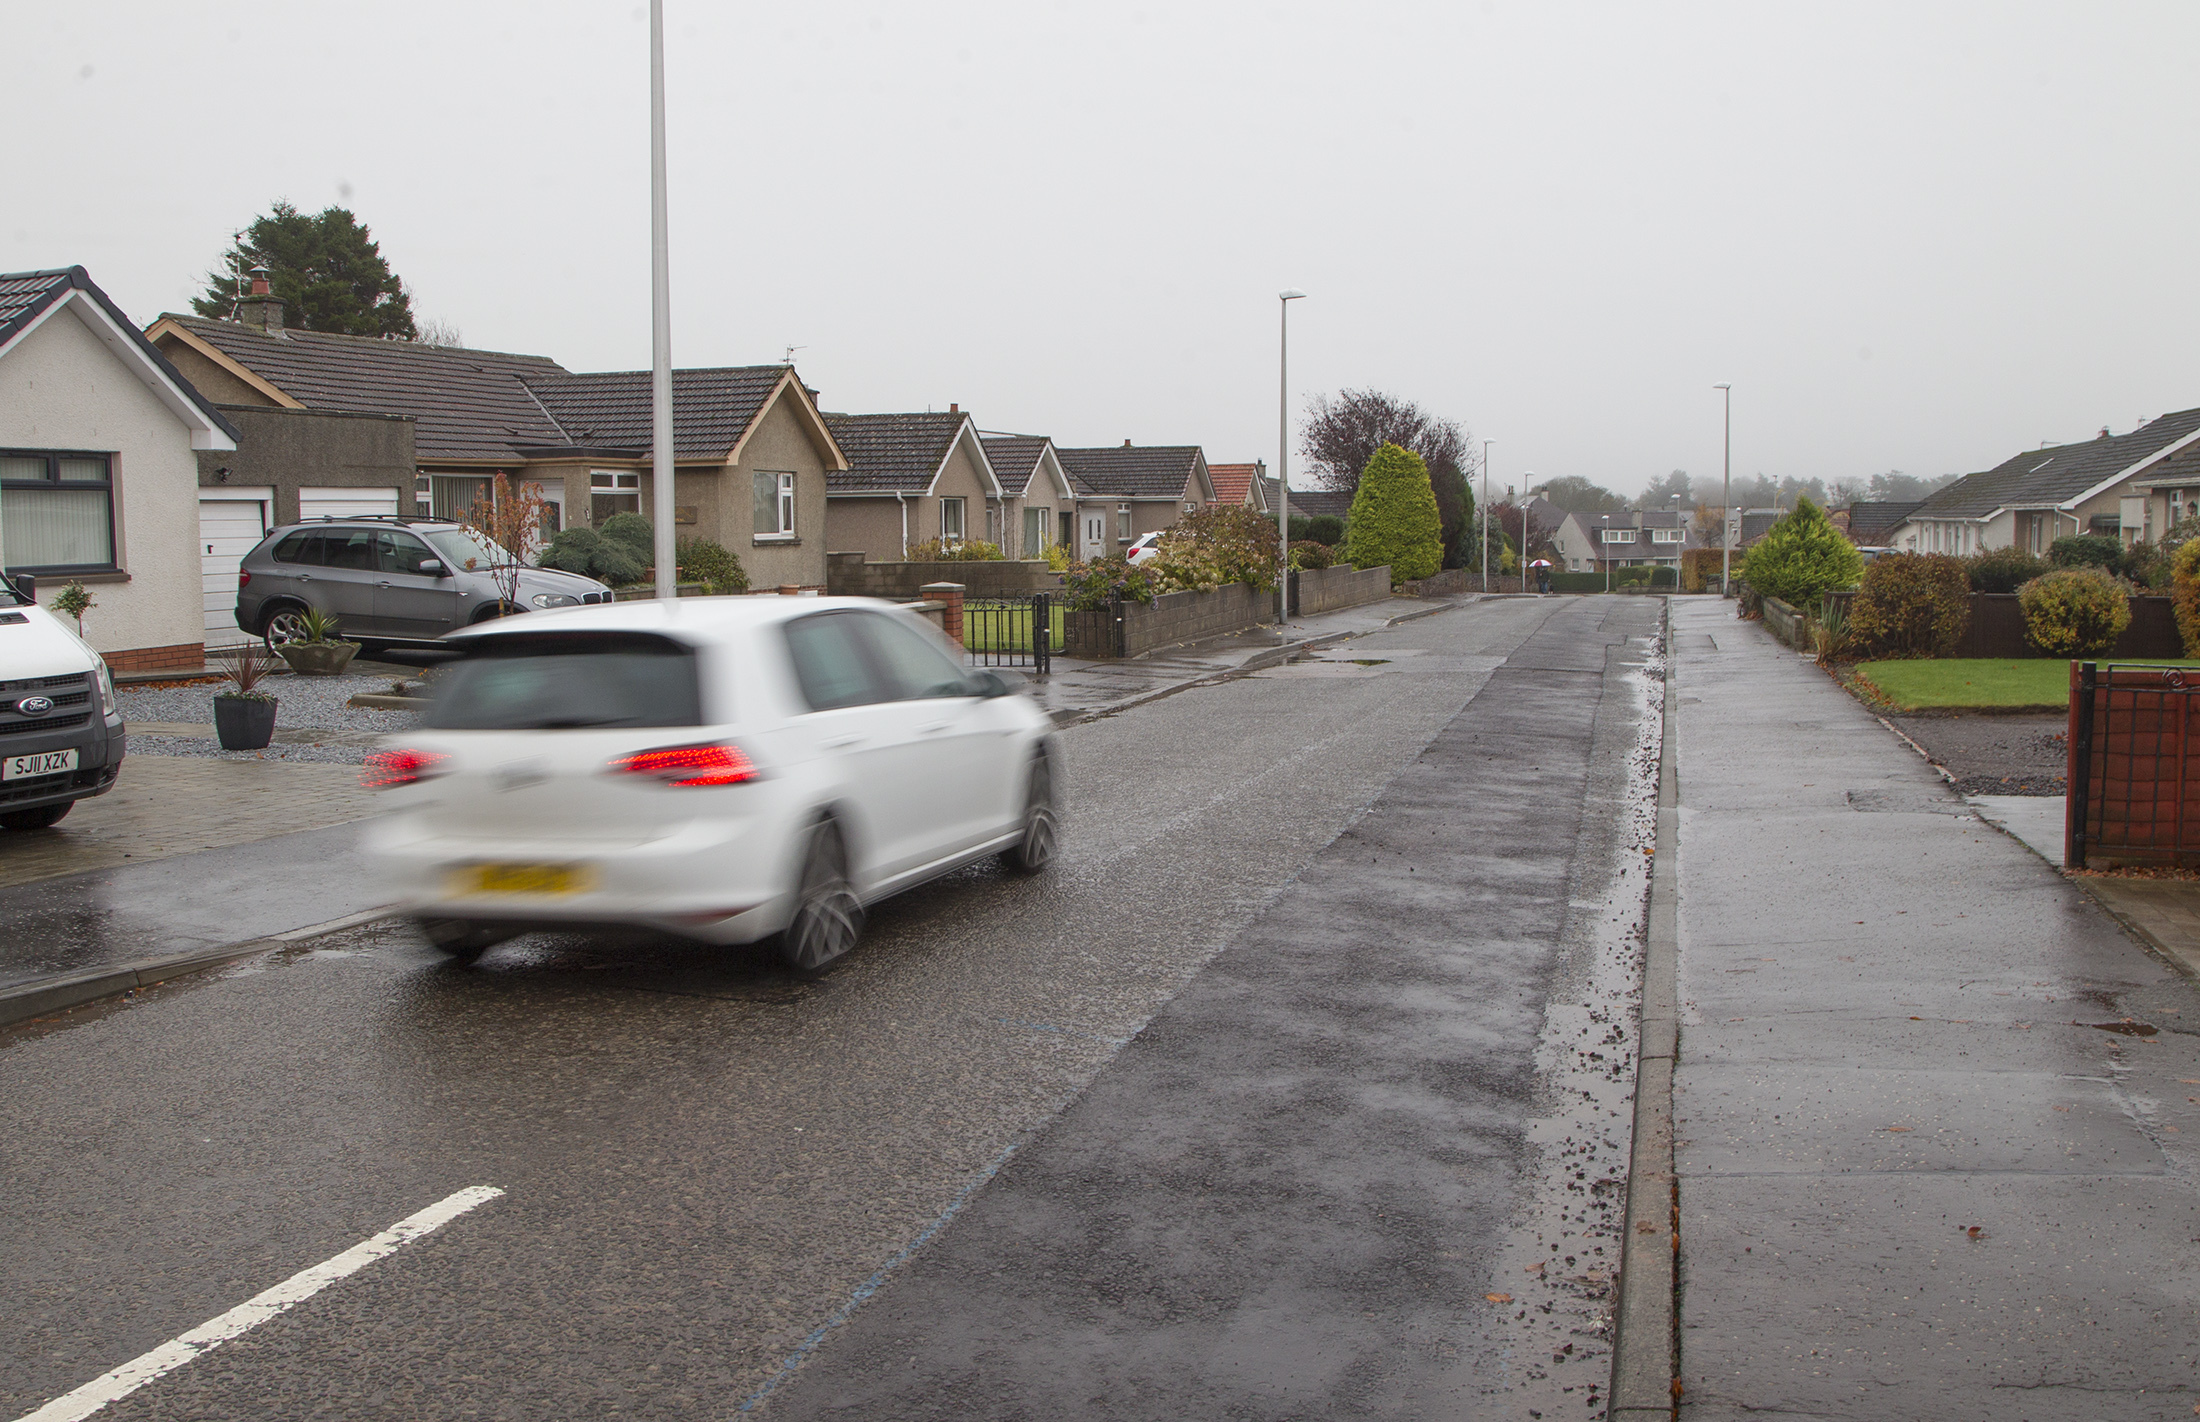 Gallowden Road is the planned location for the new speed humps